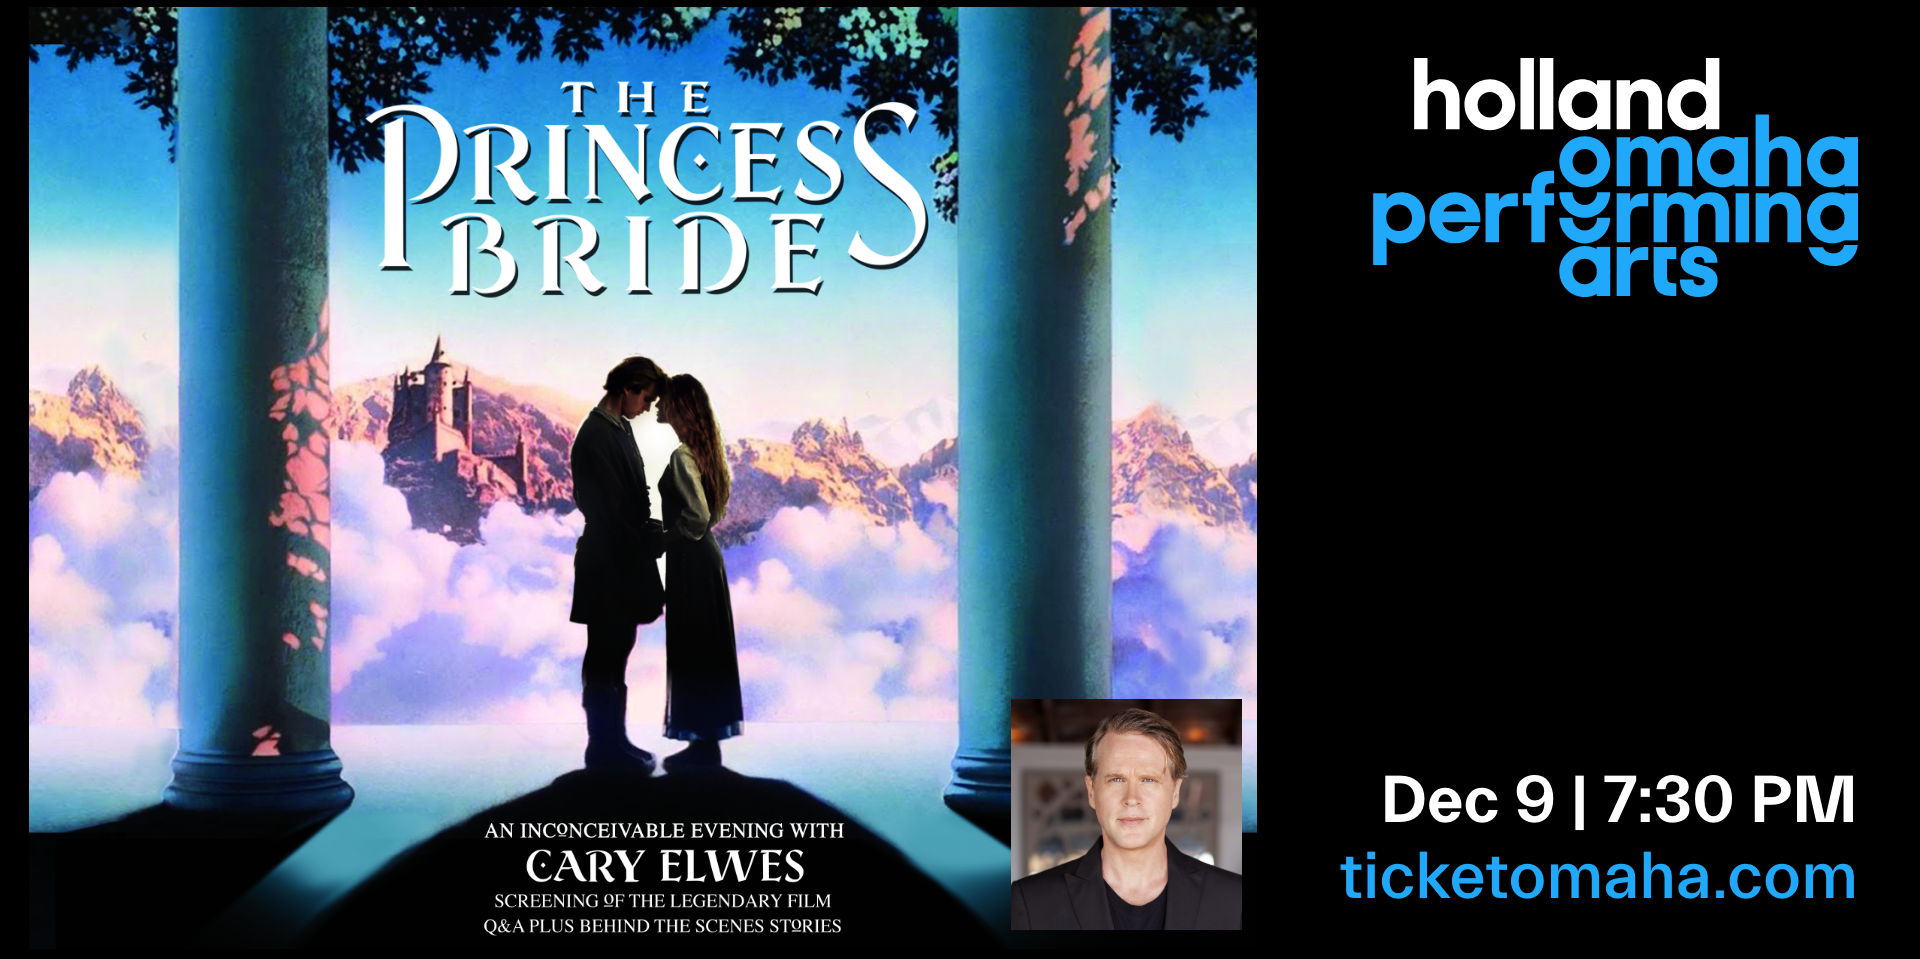 The Princess Bride: An Inconceivable Evening with Cary Elwes  promotional image